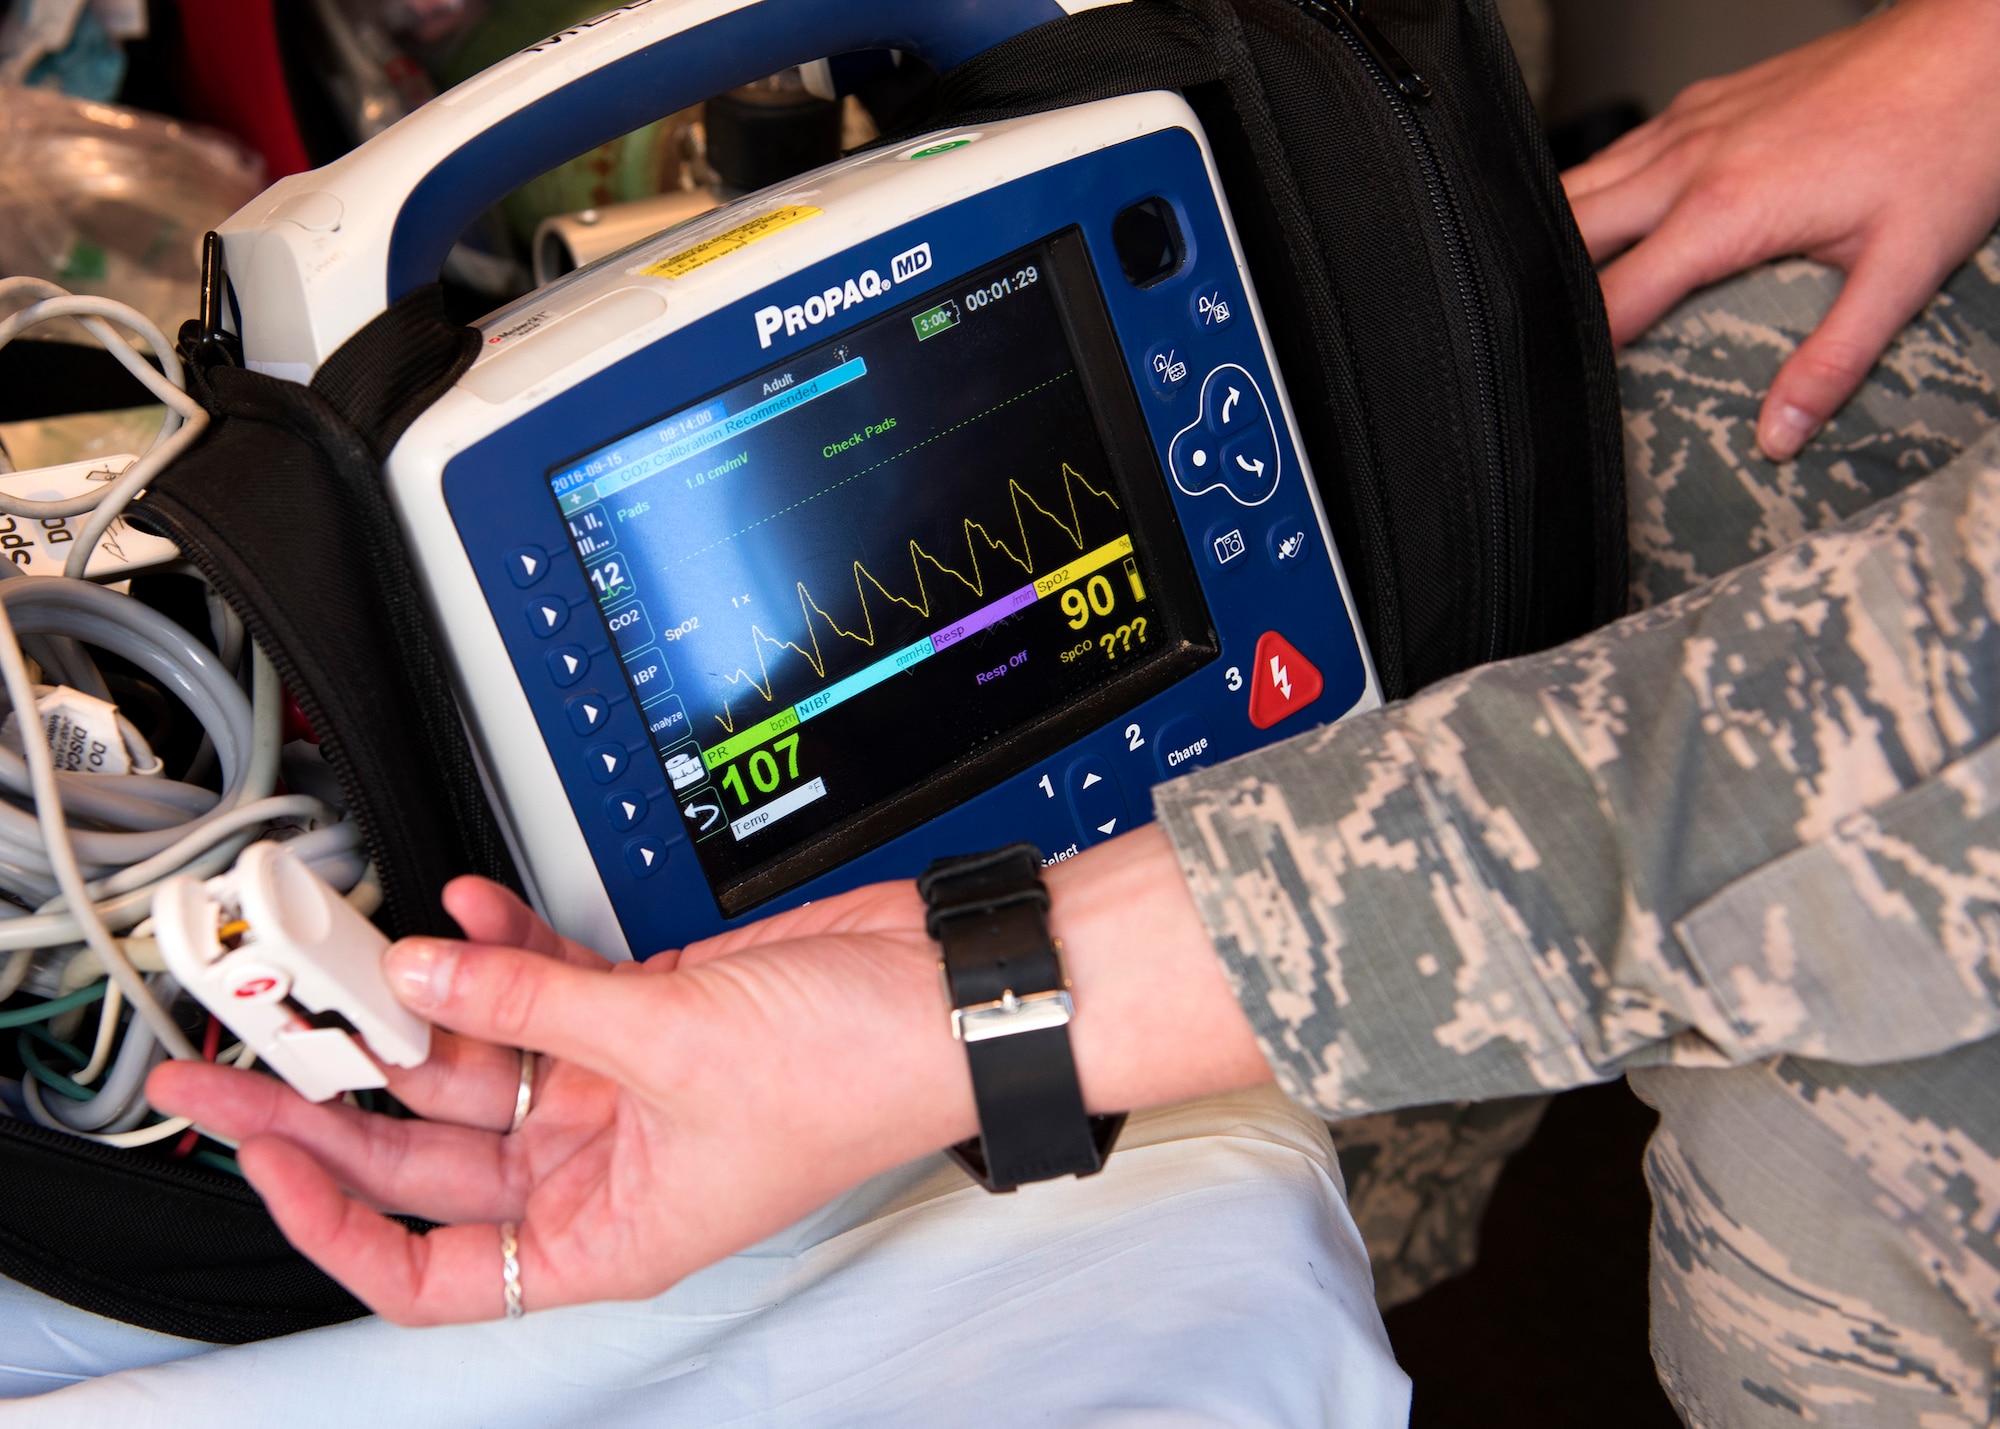 Airman 1st Class Shawn Regina McMahan, 92nd Medical Operations Squadron emergency medical technician, runs a diagnostic test of a mobile vitals monitor, Aug. 18, 2016, at Fairchild Air Force Base, Wash. Fairchild EMTs work with local civilian paramedic units to move stable patients to a local hospital. (U.S. Air Force photo/Airman 1st Class Ryan Lackey)